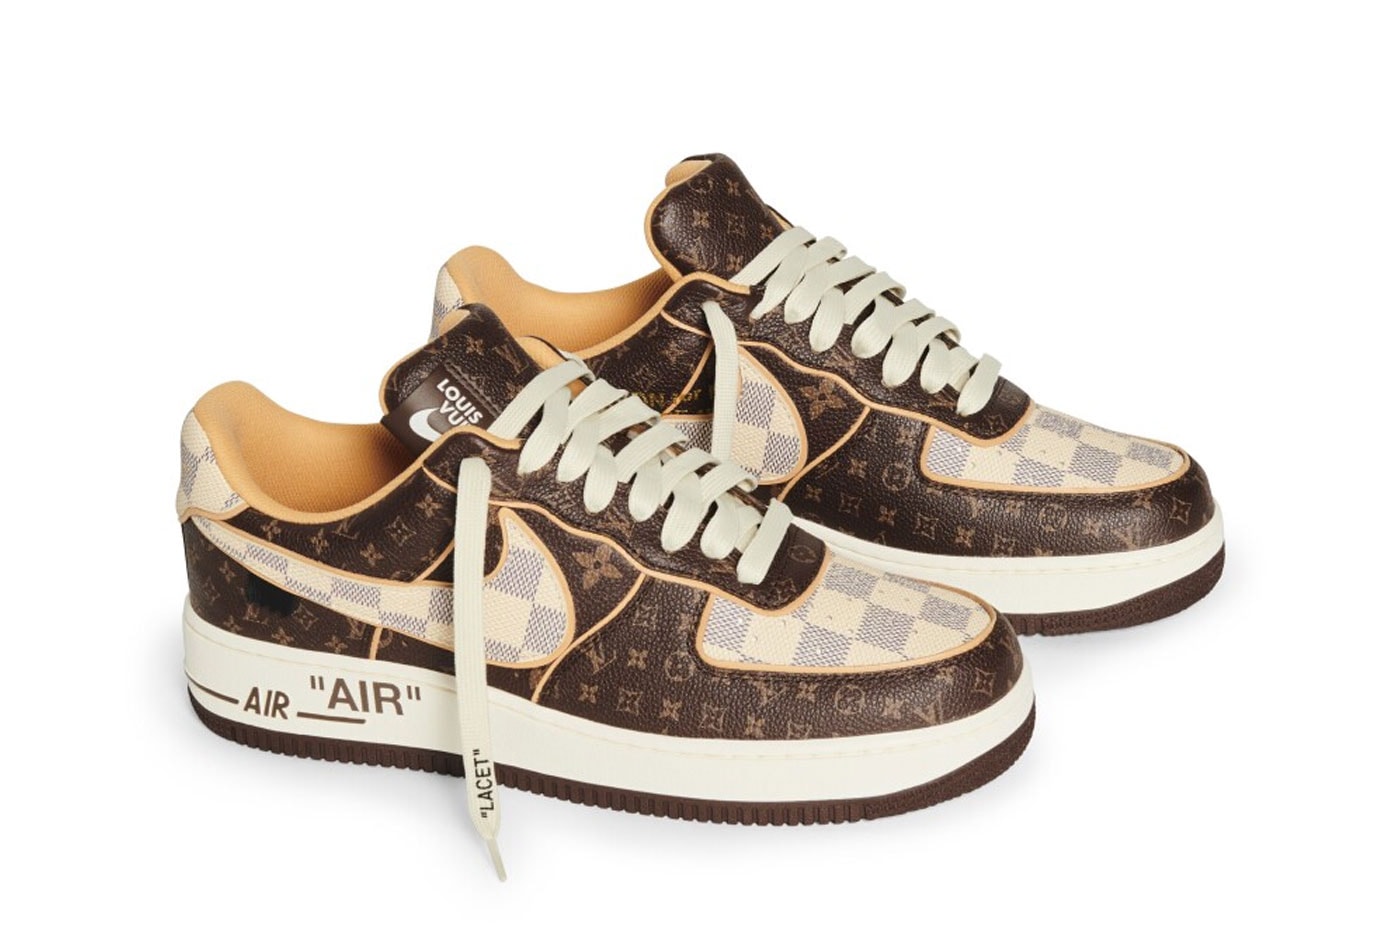 Nike X Louis Vuitton Air Force 1 Low Sneakers in White